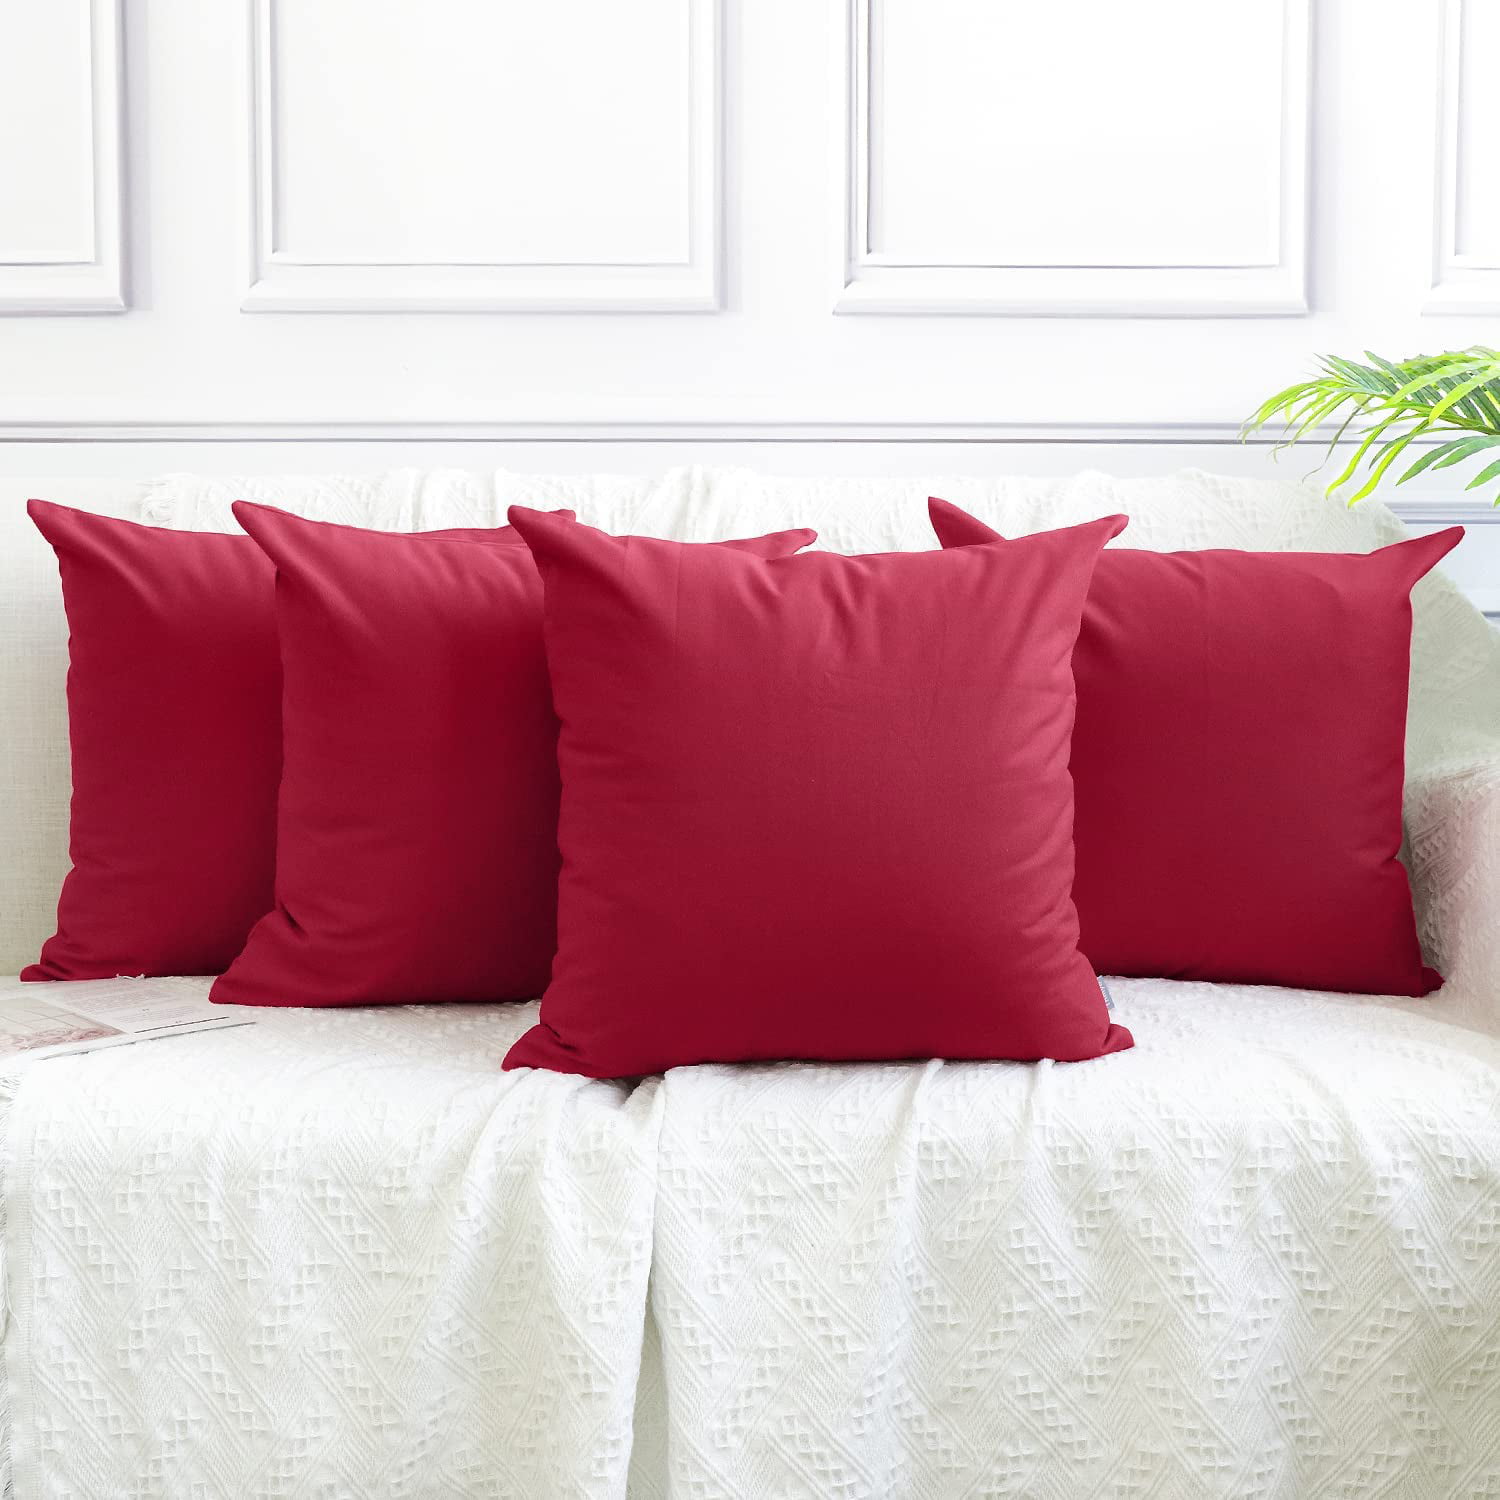 20x20inch/50x50cm, Red Cover Only,No Insert 4-Pack Cotton Comfortable Solid Decorative Throw Pillow Case Square Cushion Cover Pillowcase